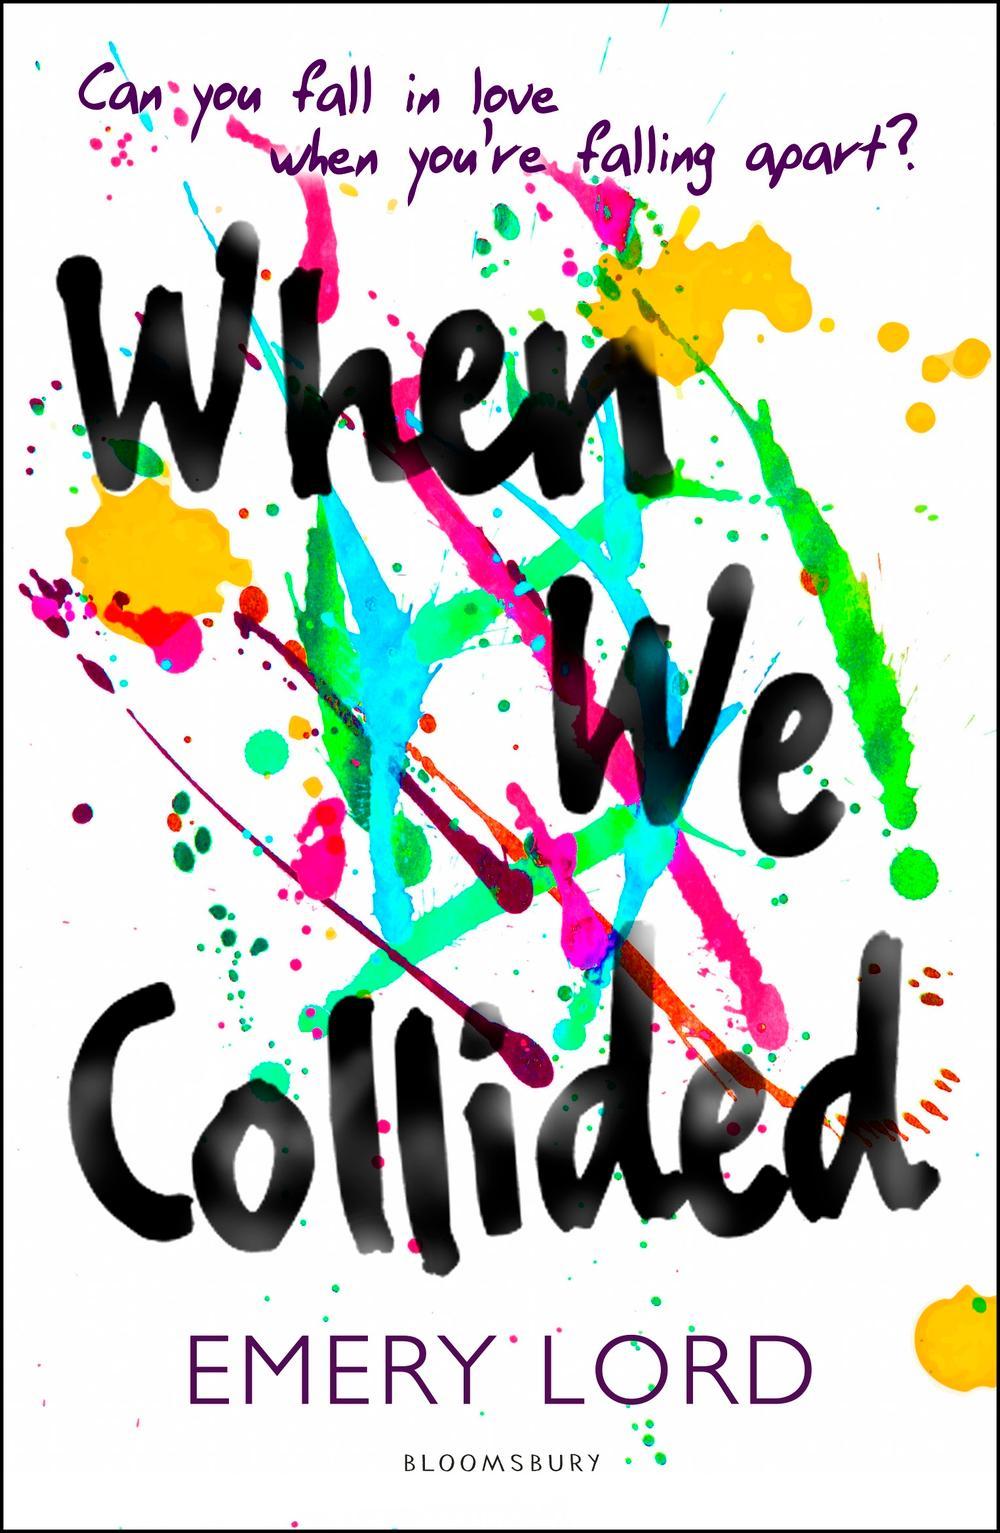 When We Collided